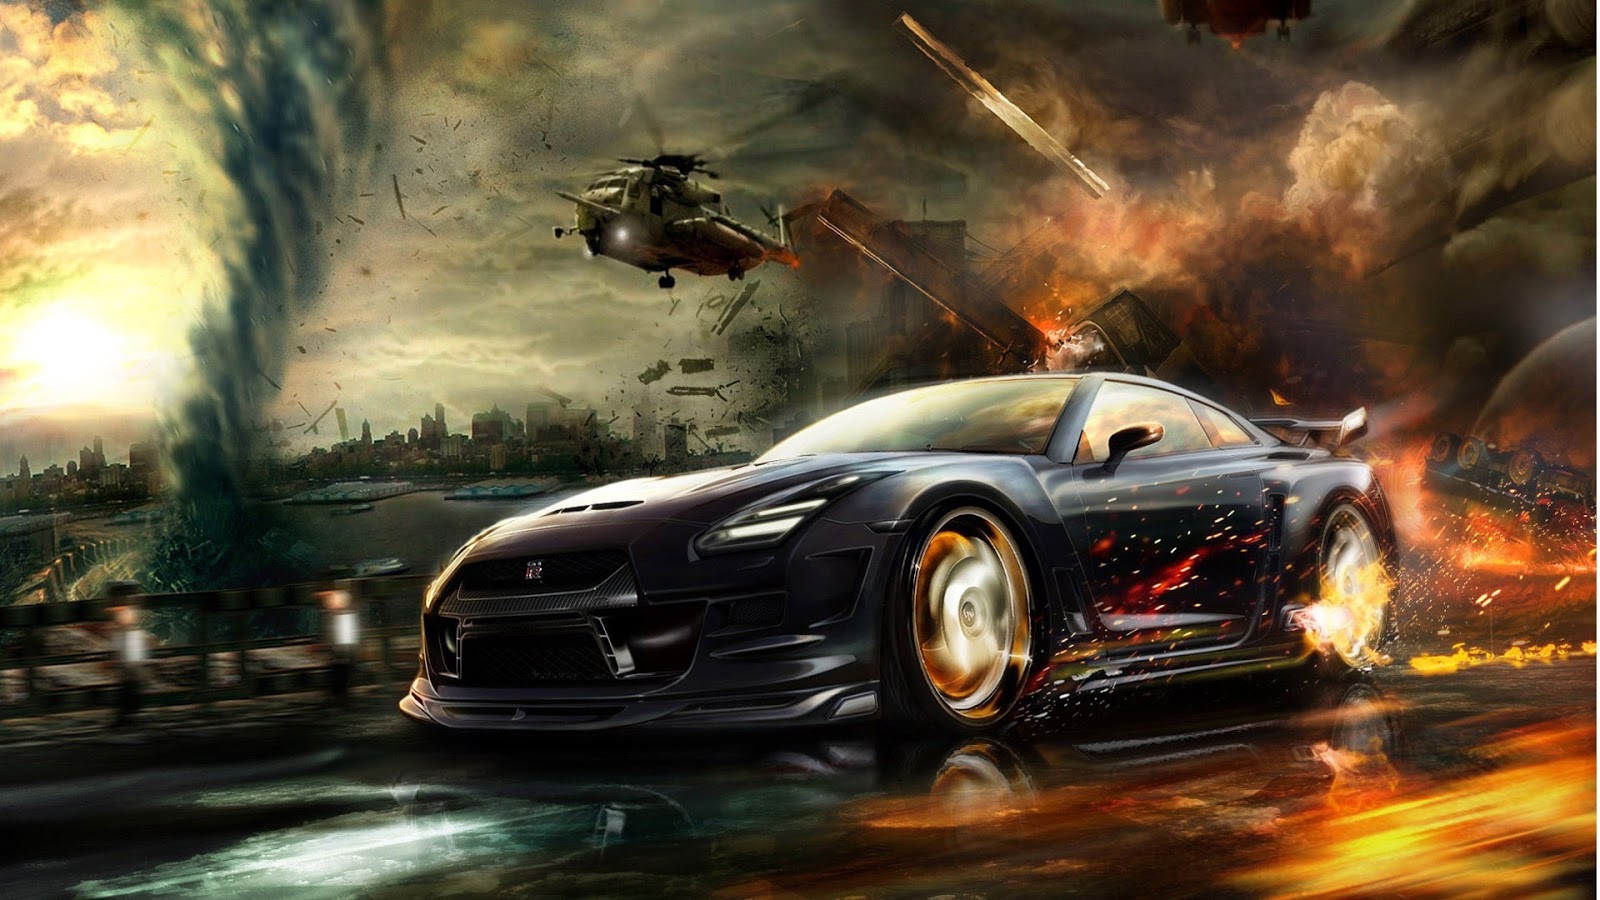 Cool Cars Wallpaper | Cool Cars Backgrounds and Images (48